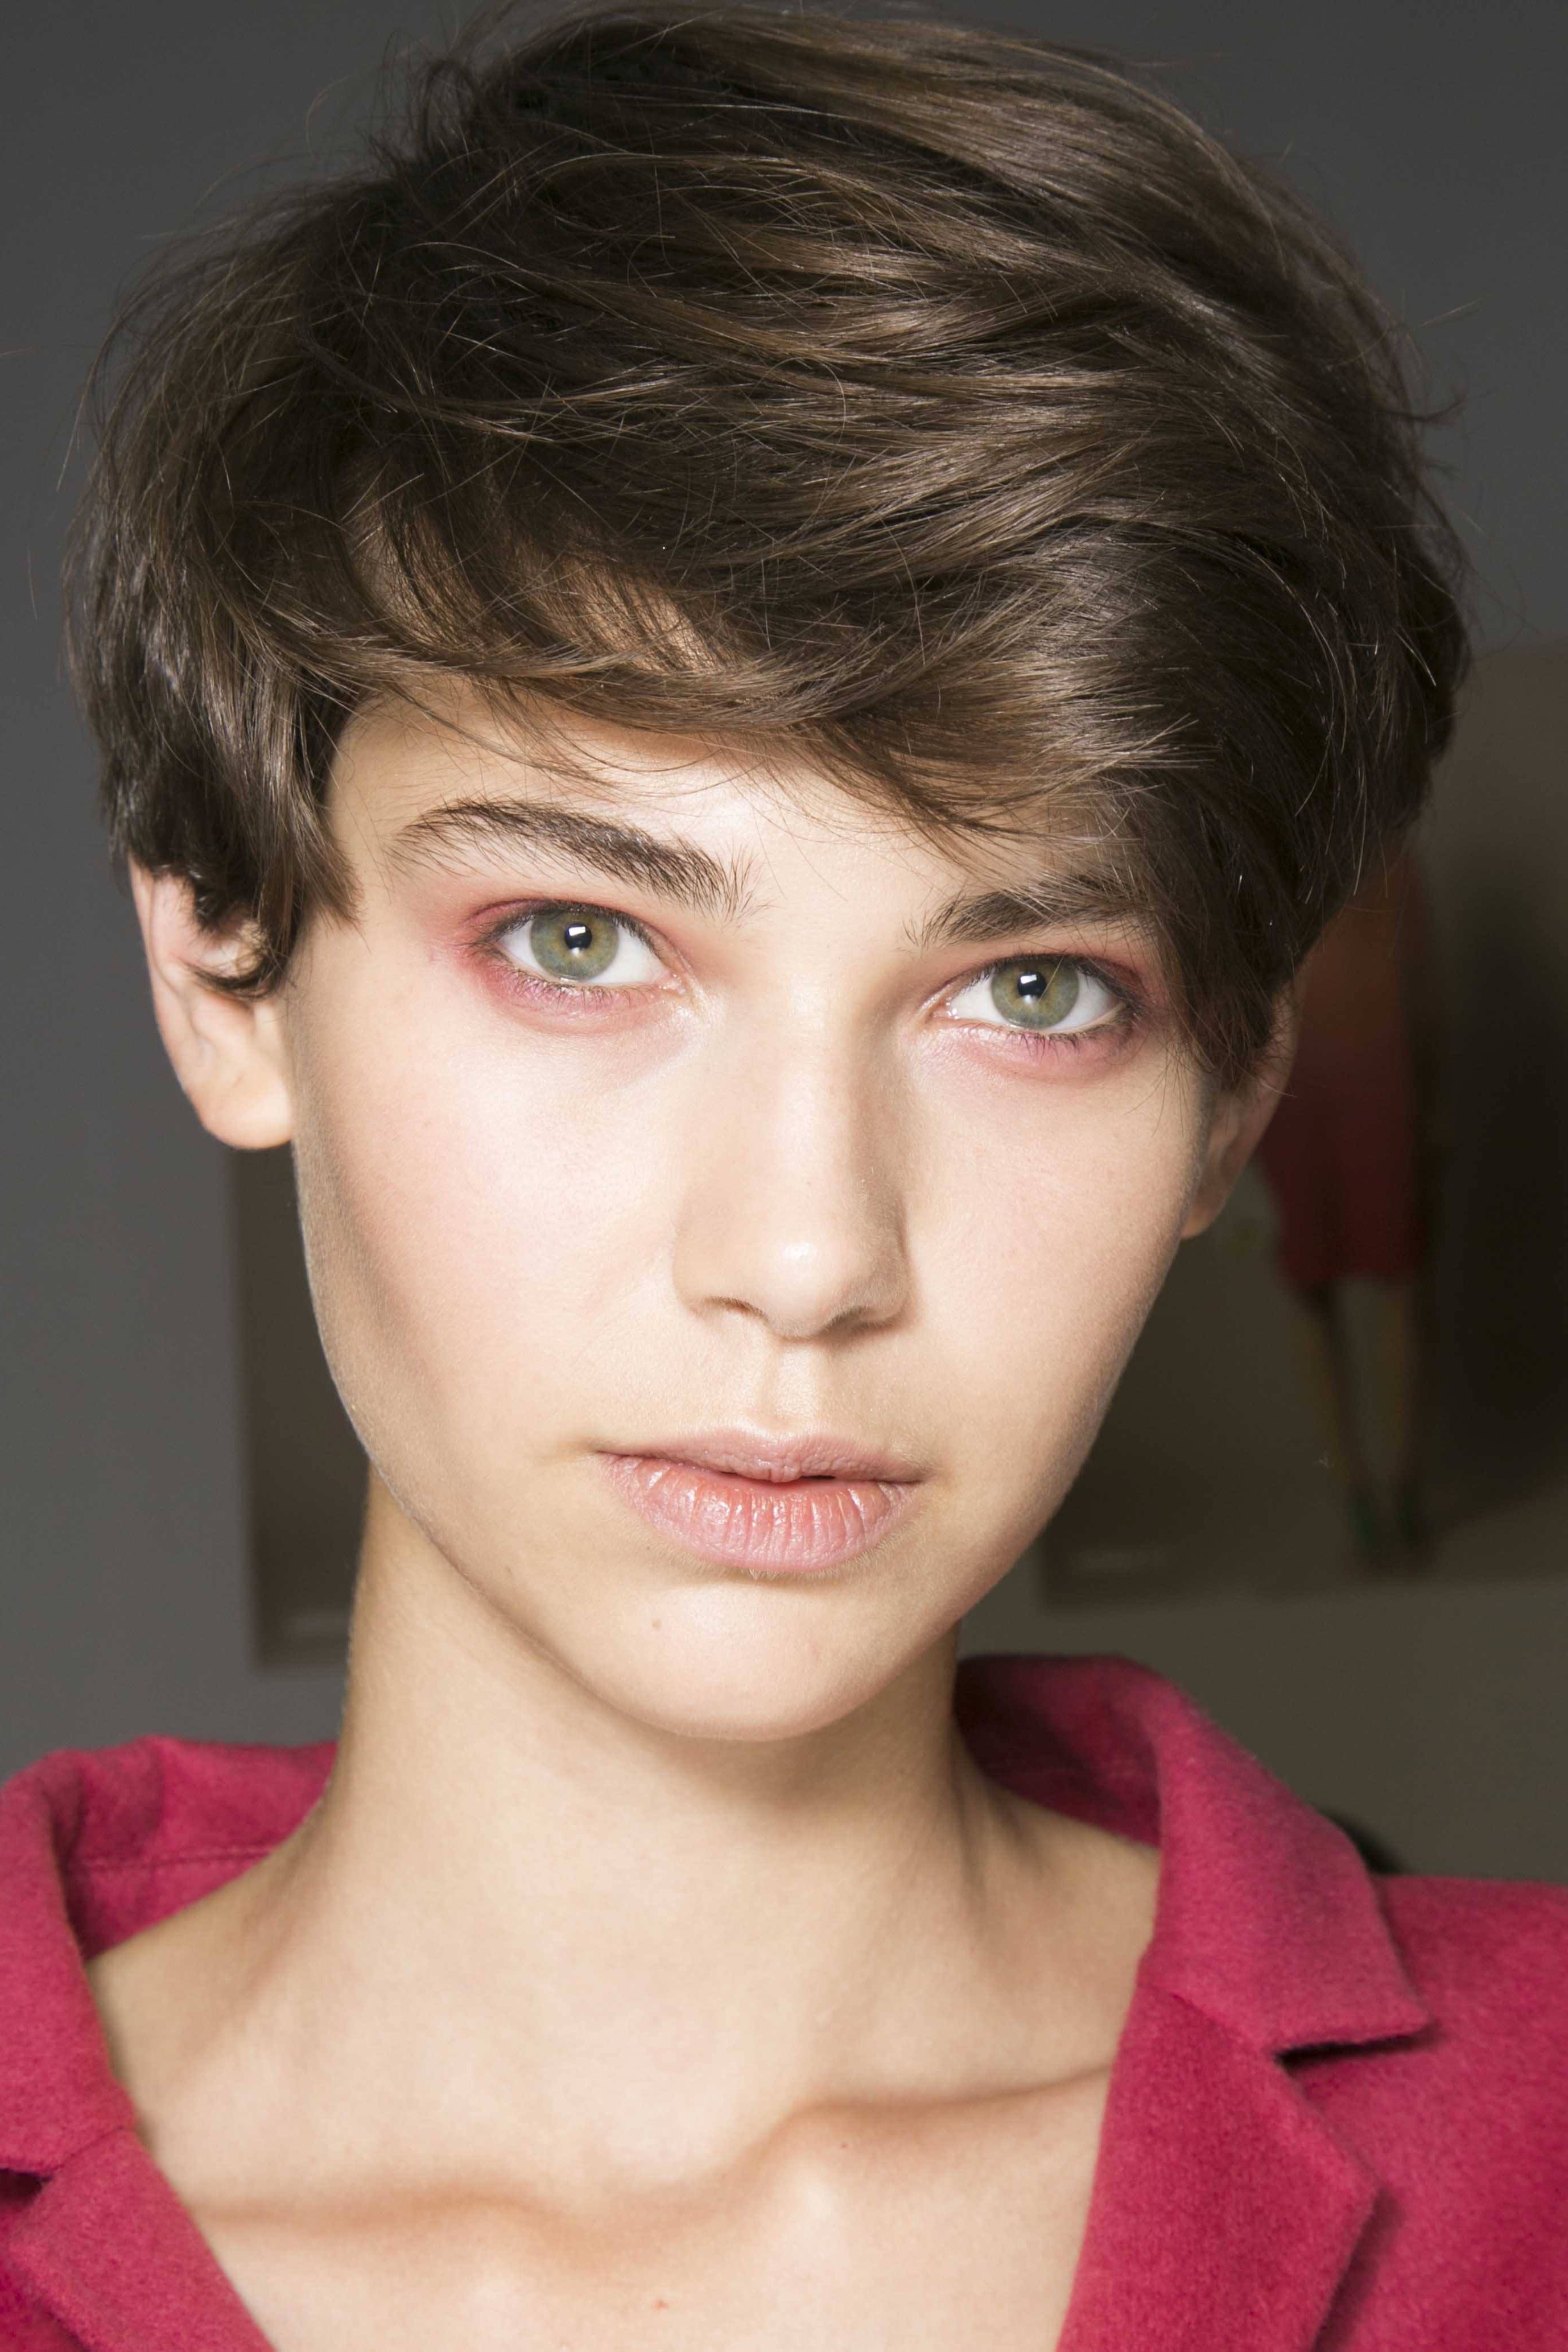 7 Sexy Short Hair Styles To Rock For A Date Or A Night Out With The In Sassy Pixie Hairstyles (View 8 of 20)